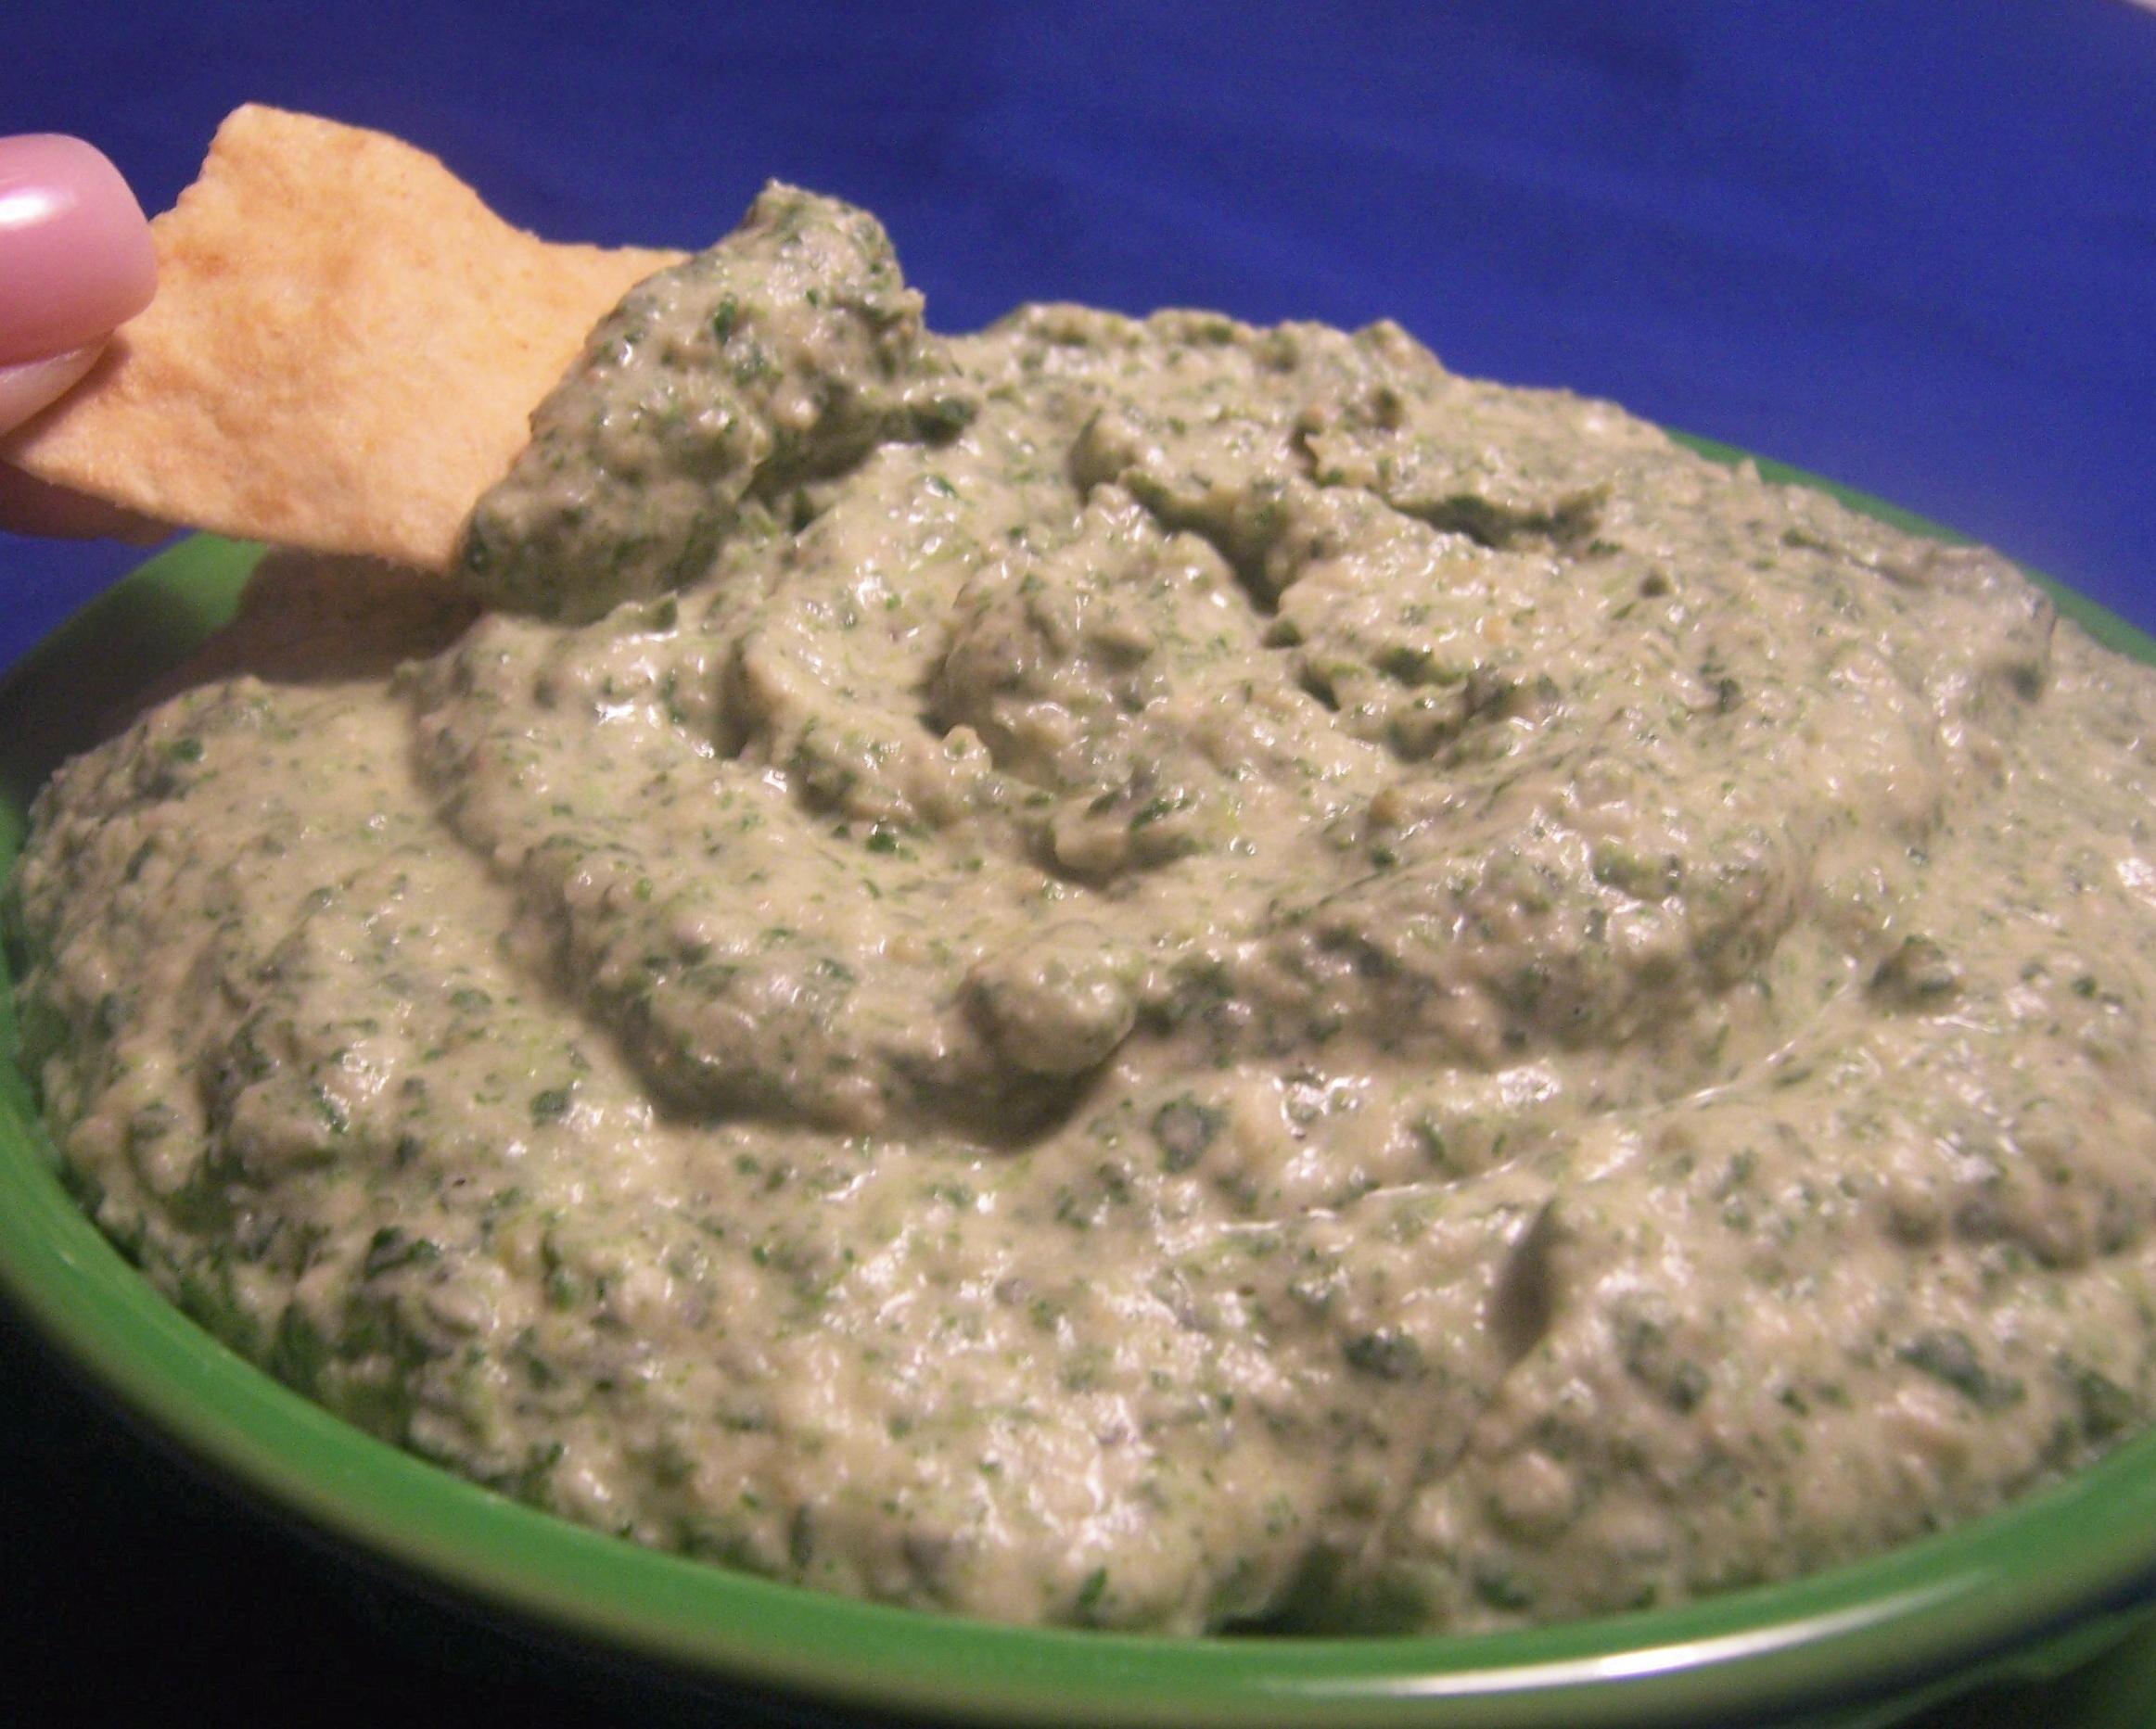  Put a spin on your typical hummus dip.